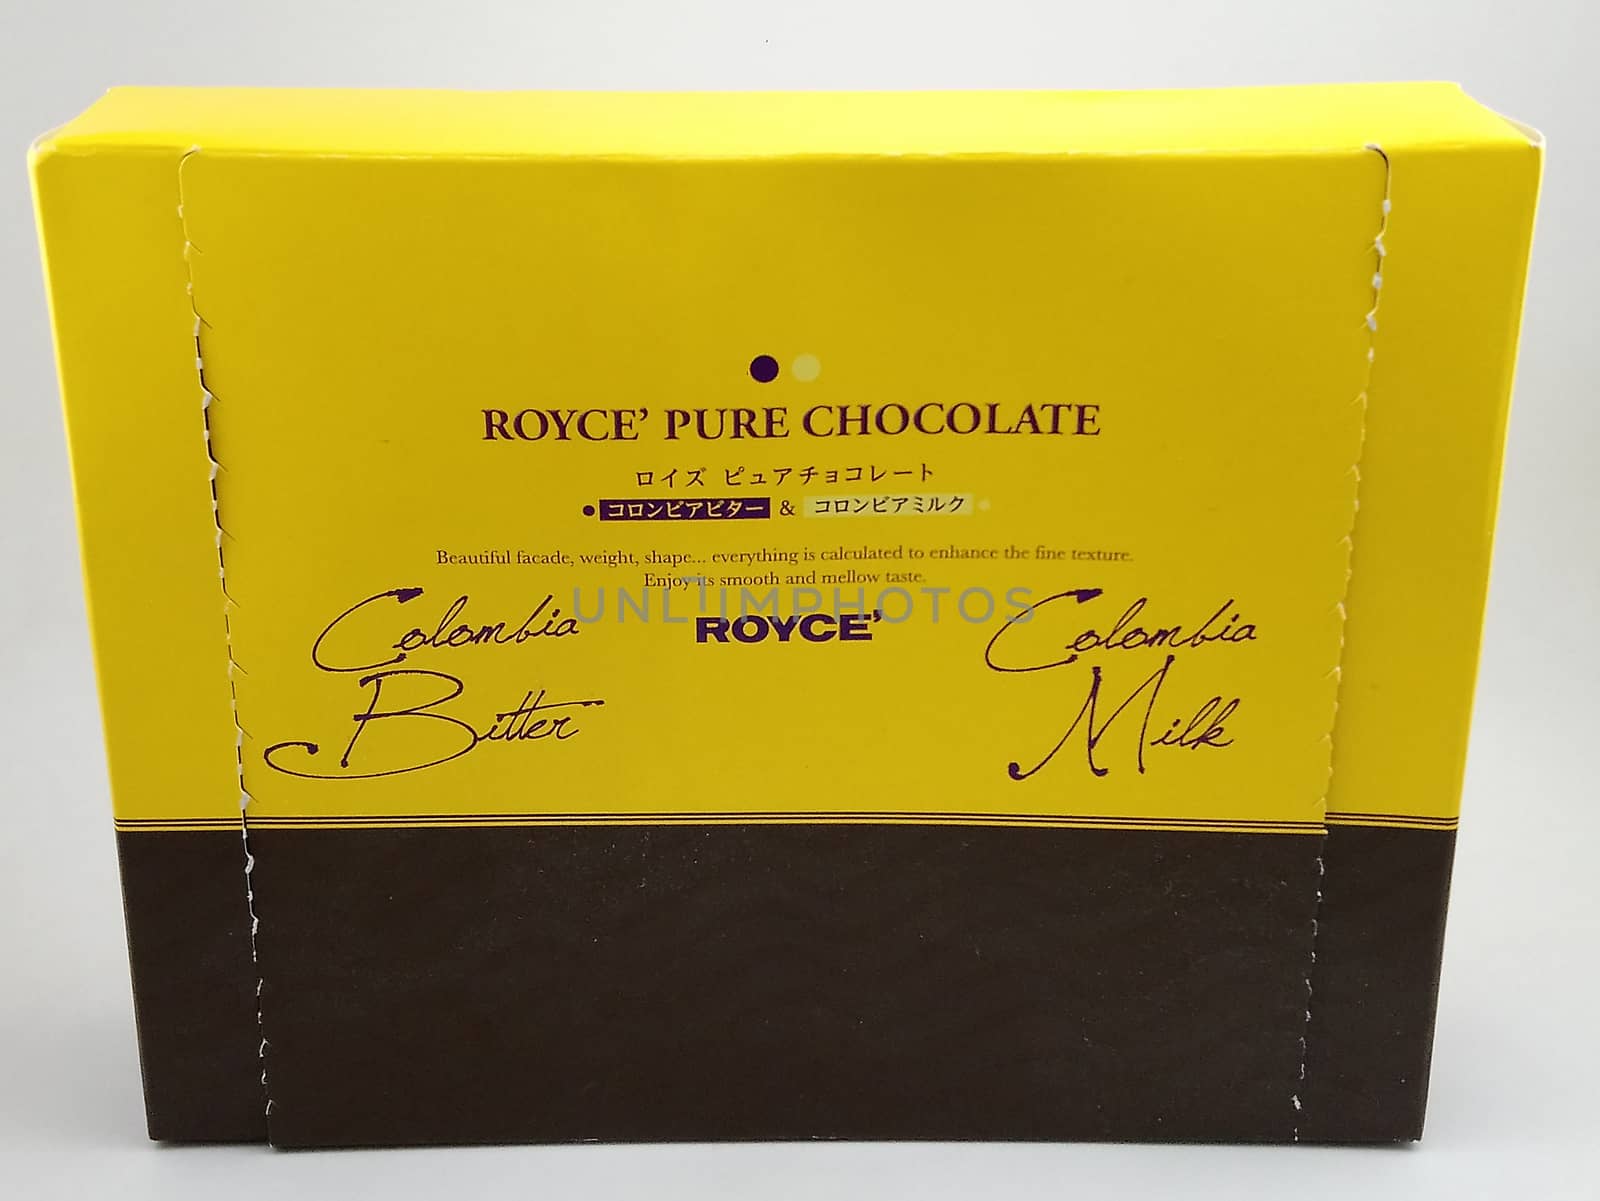 Royce pure chocolate Colombia bitter and milk in Manila, Philipp by imwaltersy